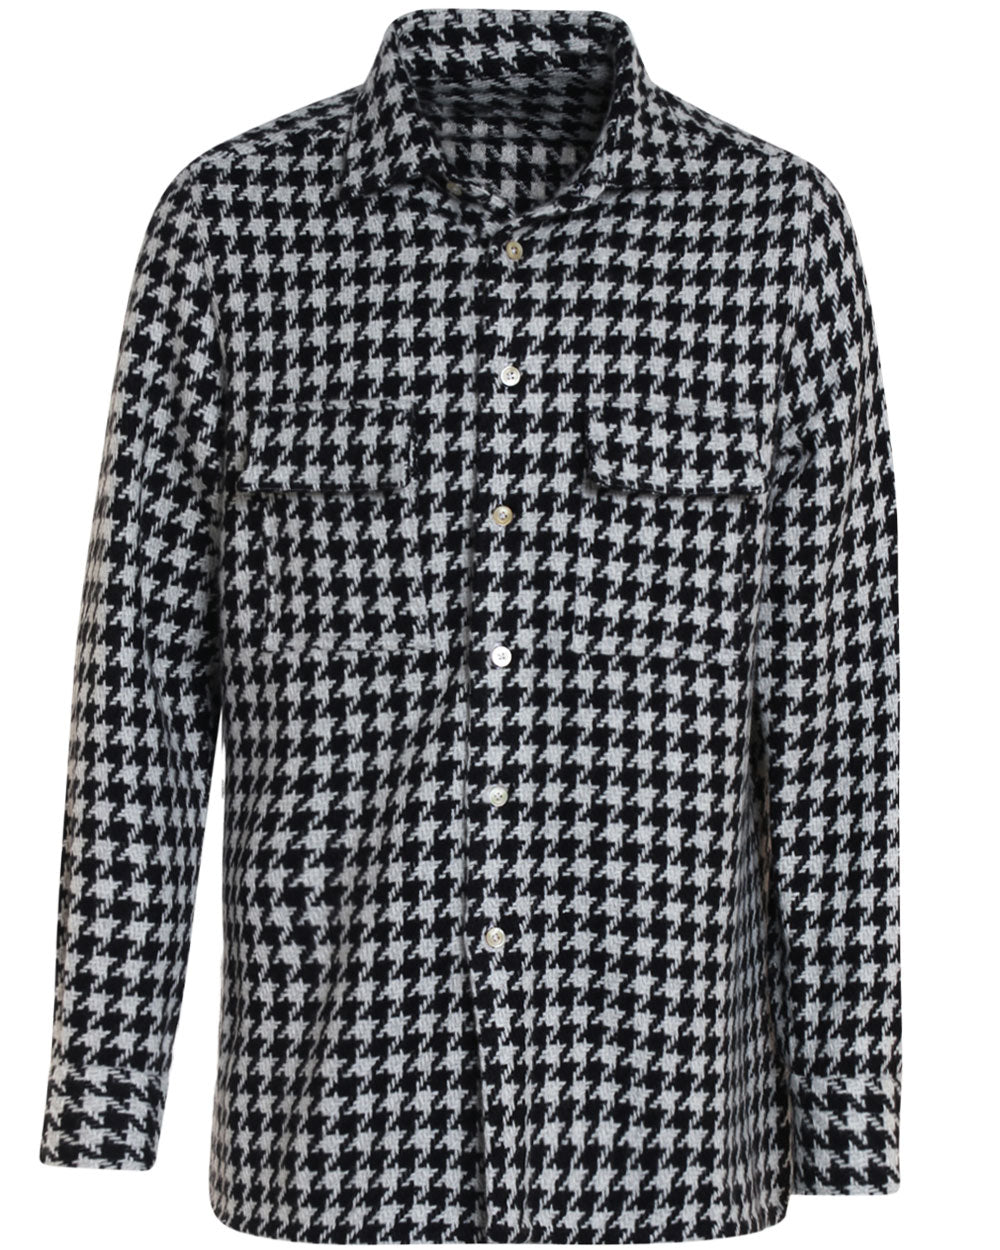 Black and Ivory Cashmere Exploded Houndstooth Overshirt